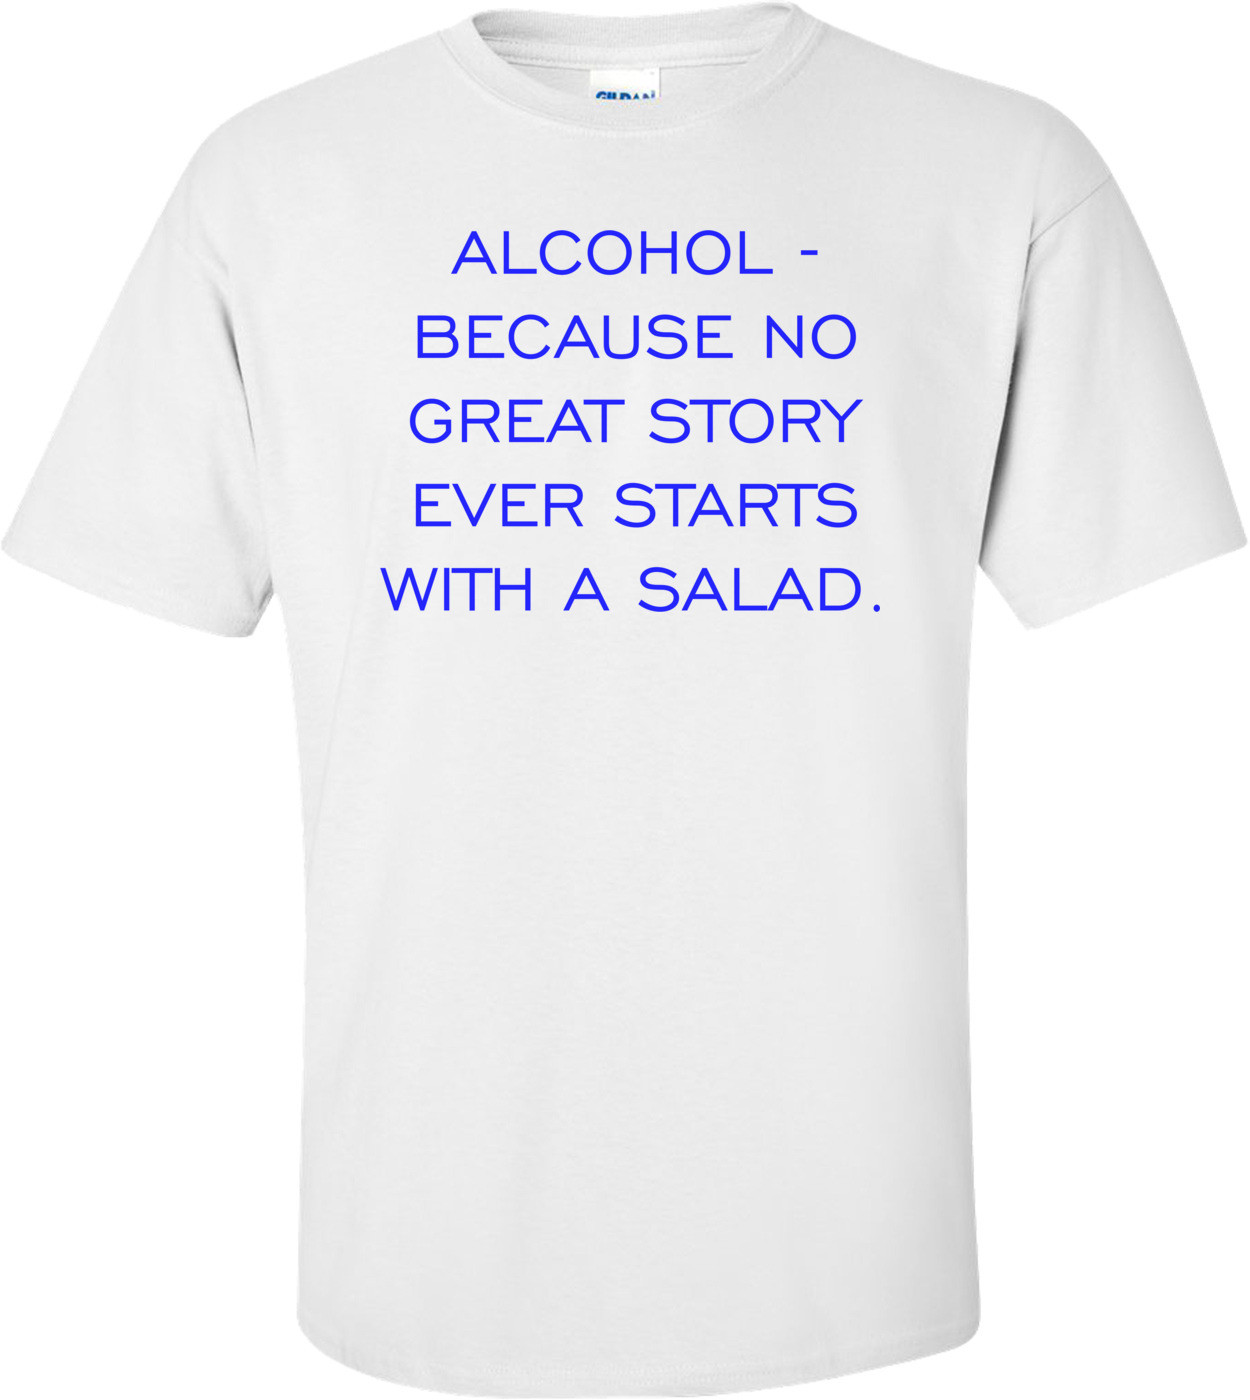 ALCOHOL - BECAUSE NO GREAT STORY EVER STARTS WITH A SALAD.